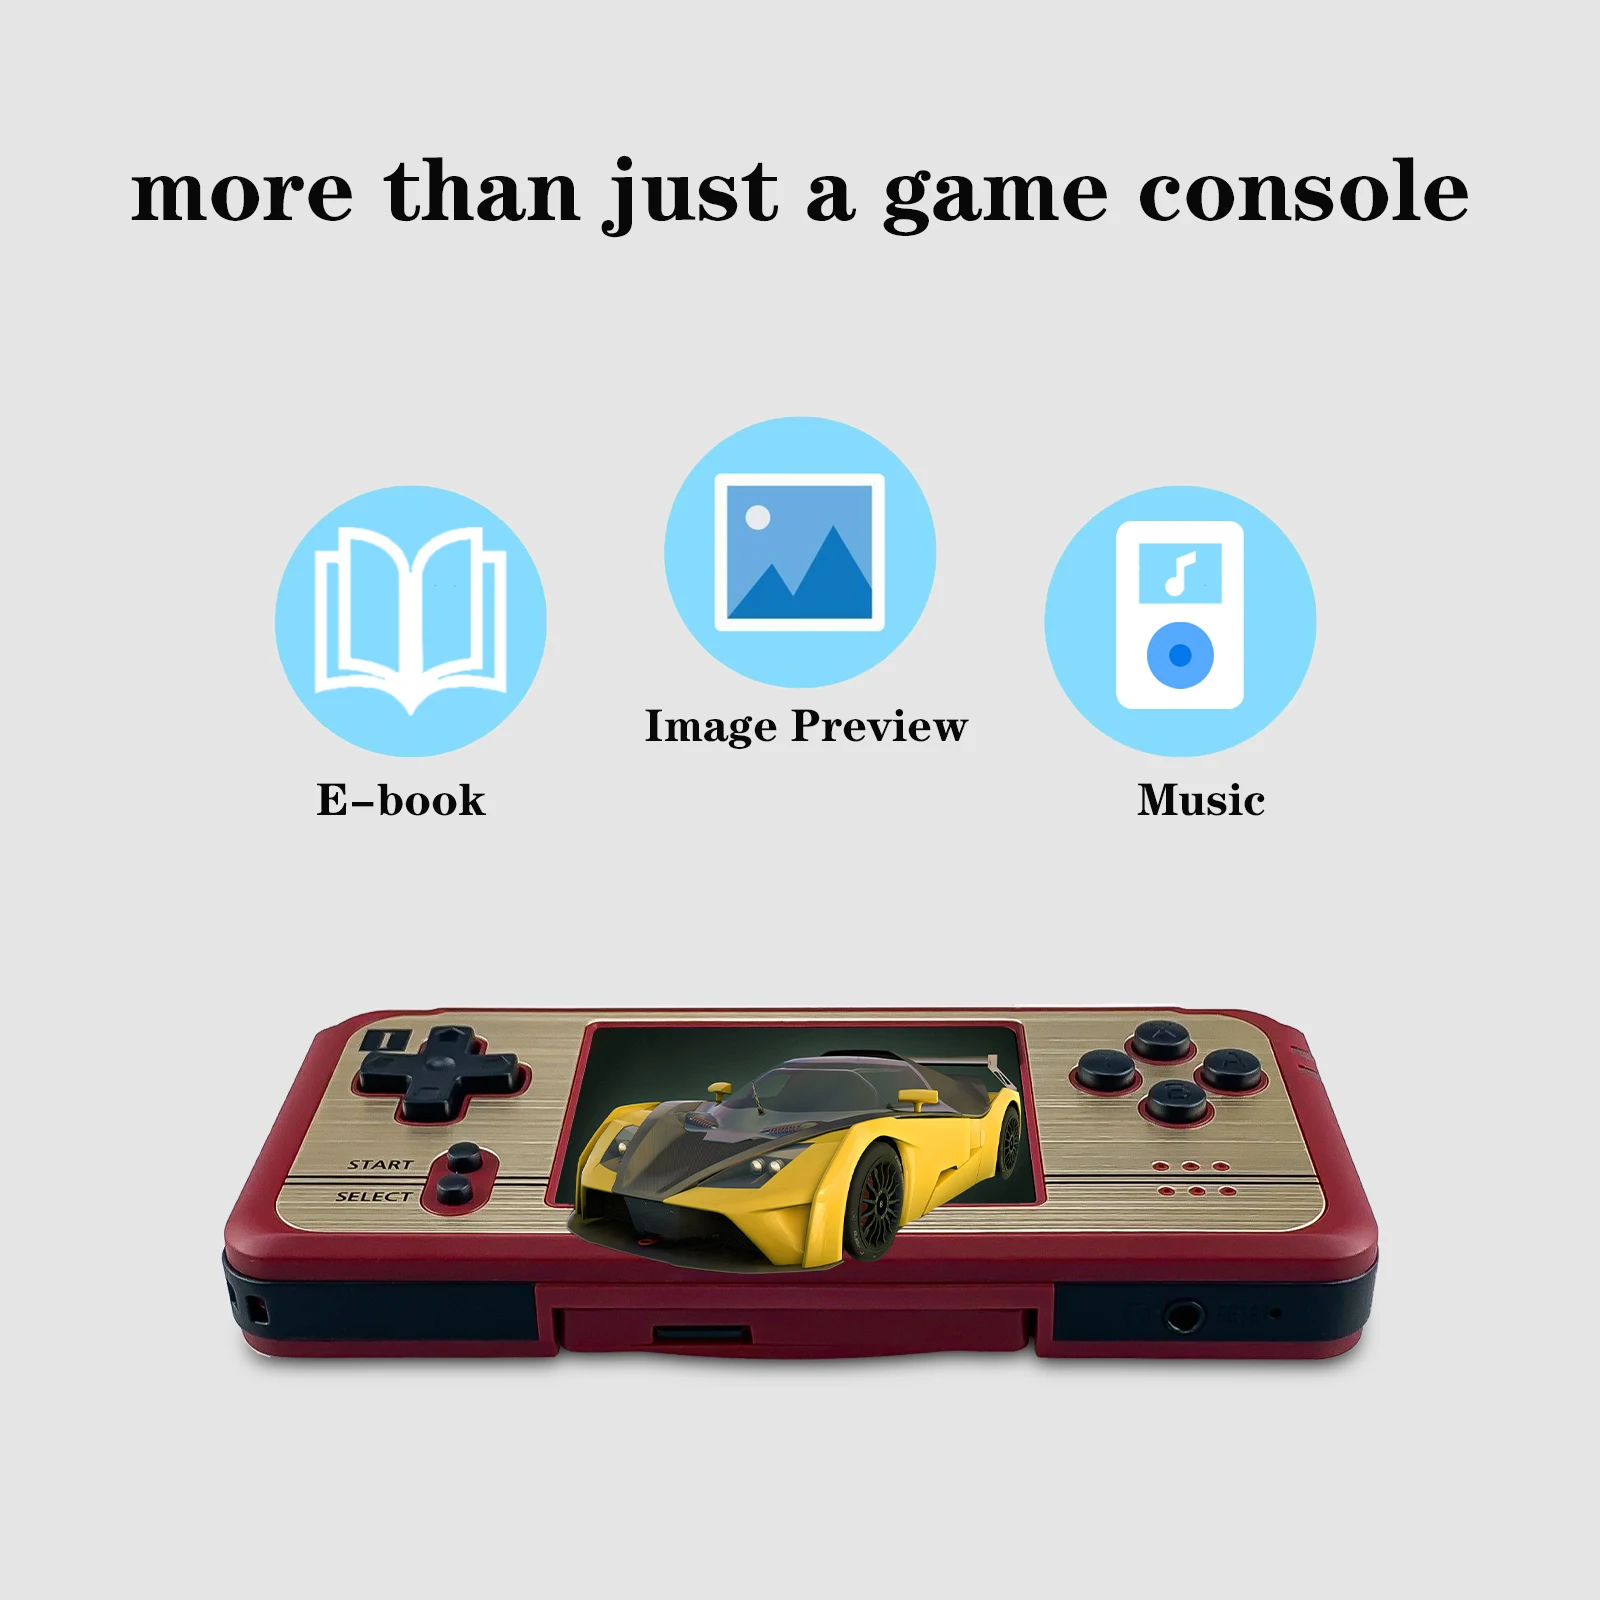 ANBERNIC NEW K101 Plus Handheld Game Player Retro Game 3 inch LCD Screen Video Game Console 32Bit 900 Games G BA Support Console images - 6